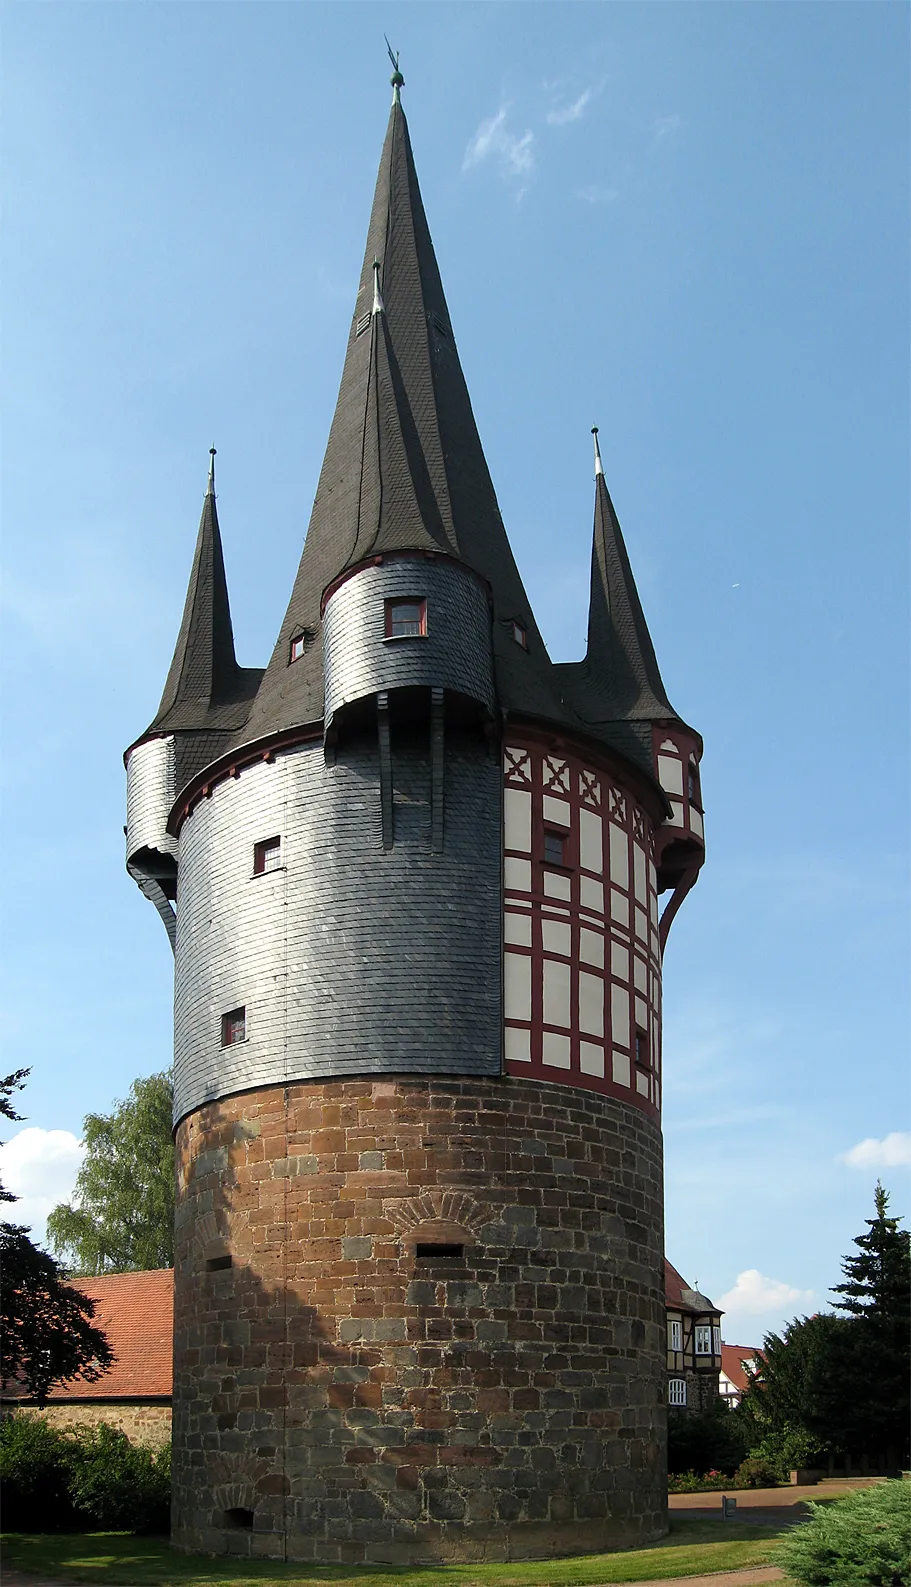 Photo showing: The Junker-Hansen-Tower, the town's landmark of Neustadt, is build in 1480 and is today one of highest Timber framing buildings in Europe. The tower is 50m high an has a diameter of 13 m.